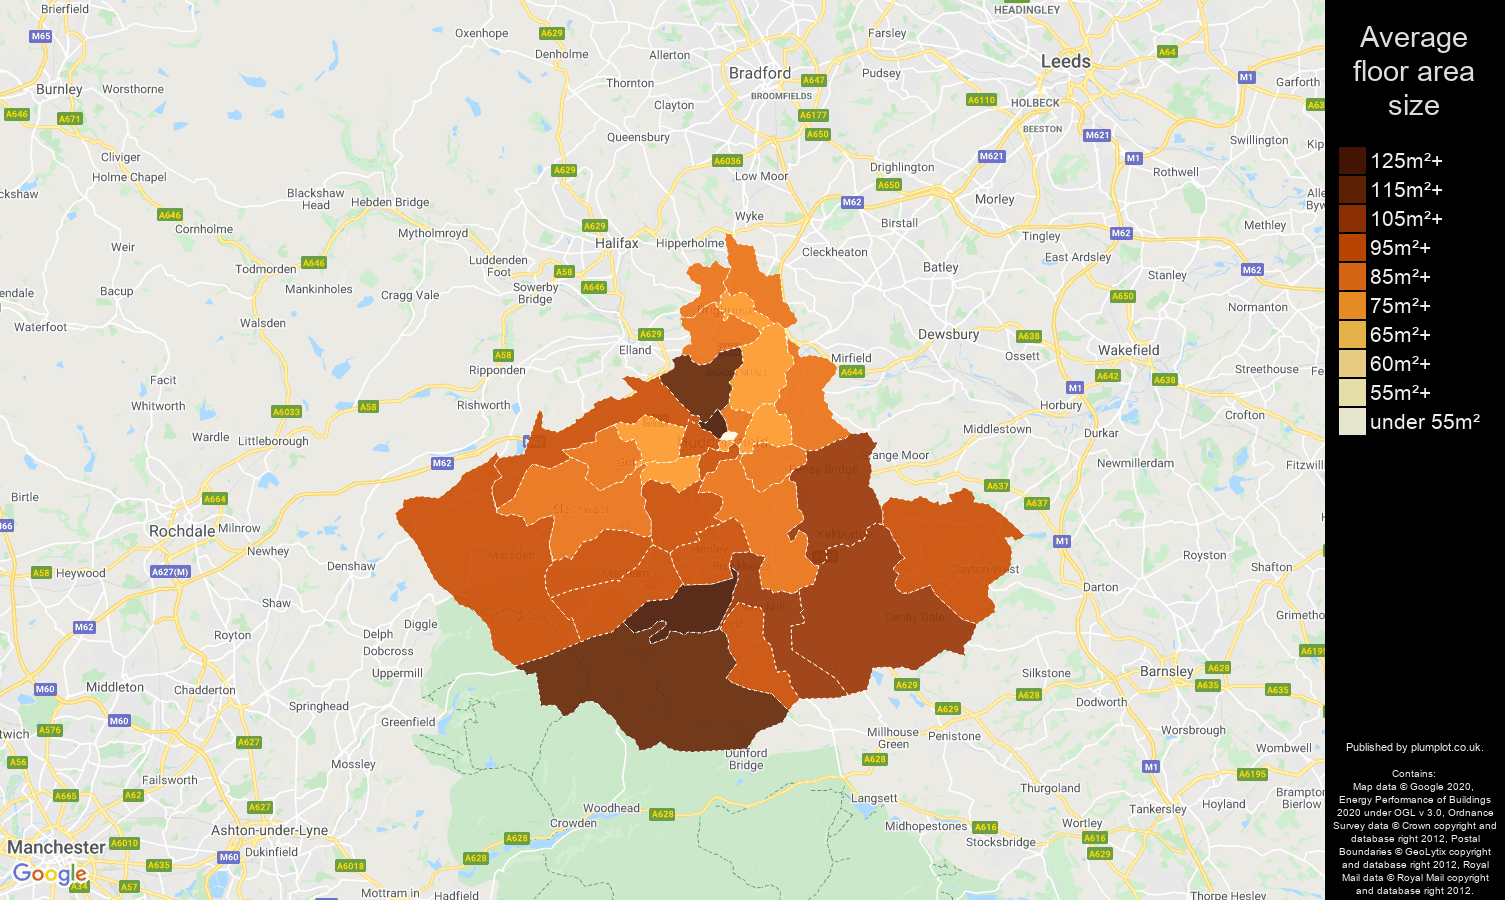 Huddersfield map of average floor area size of houses